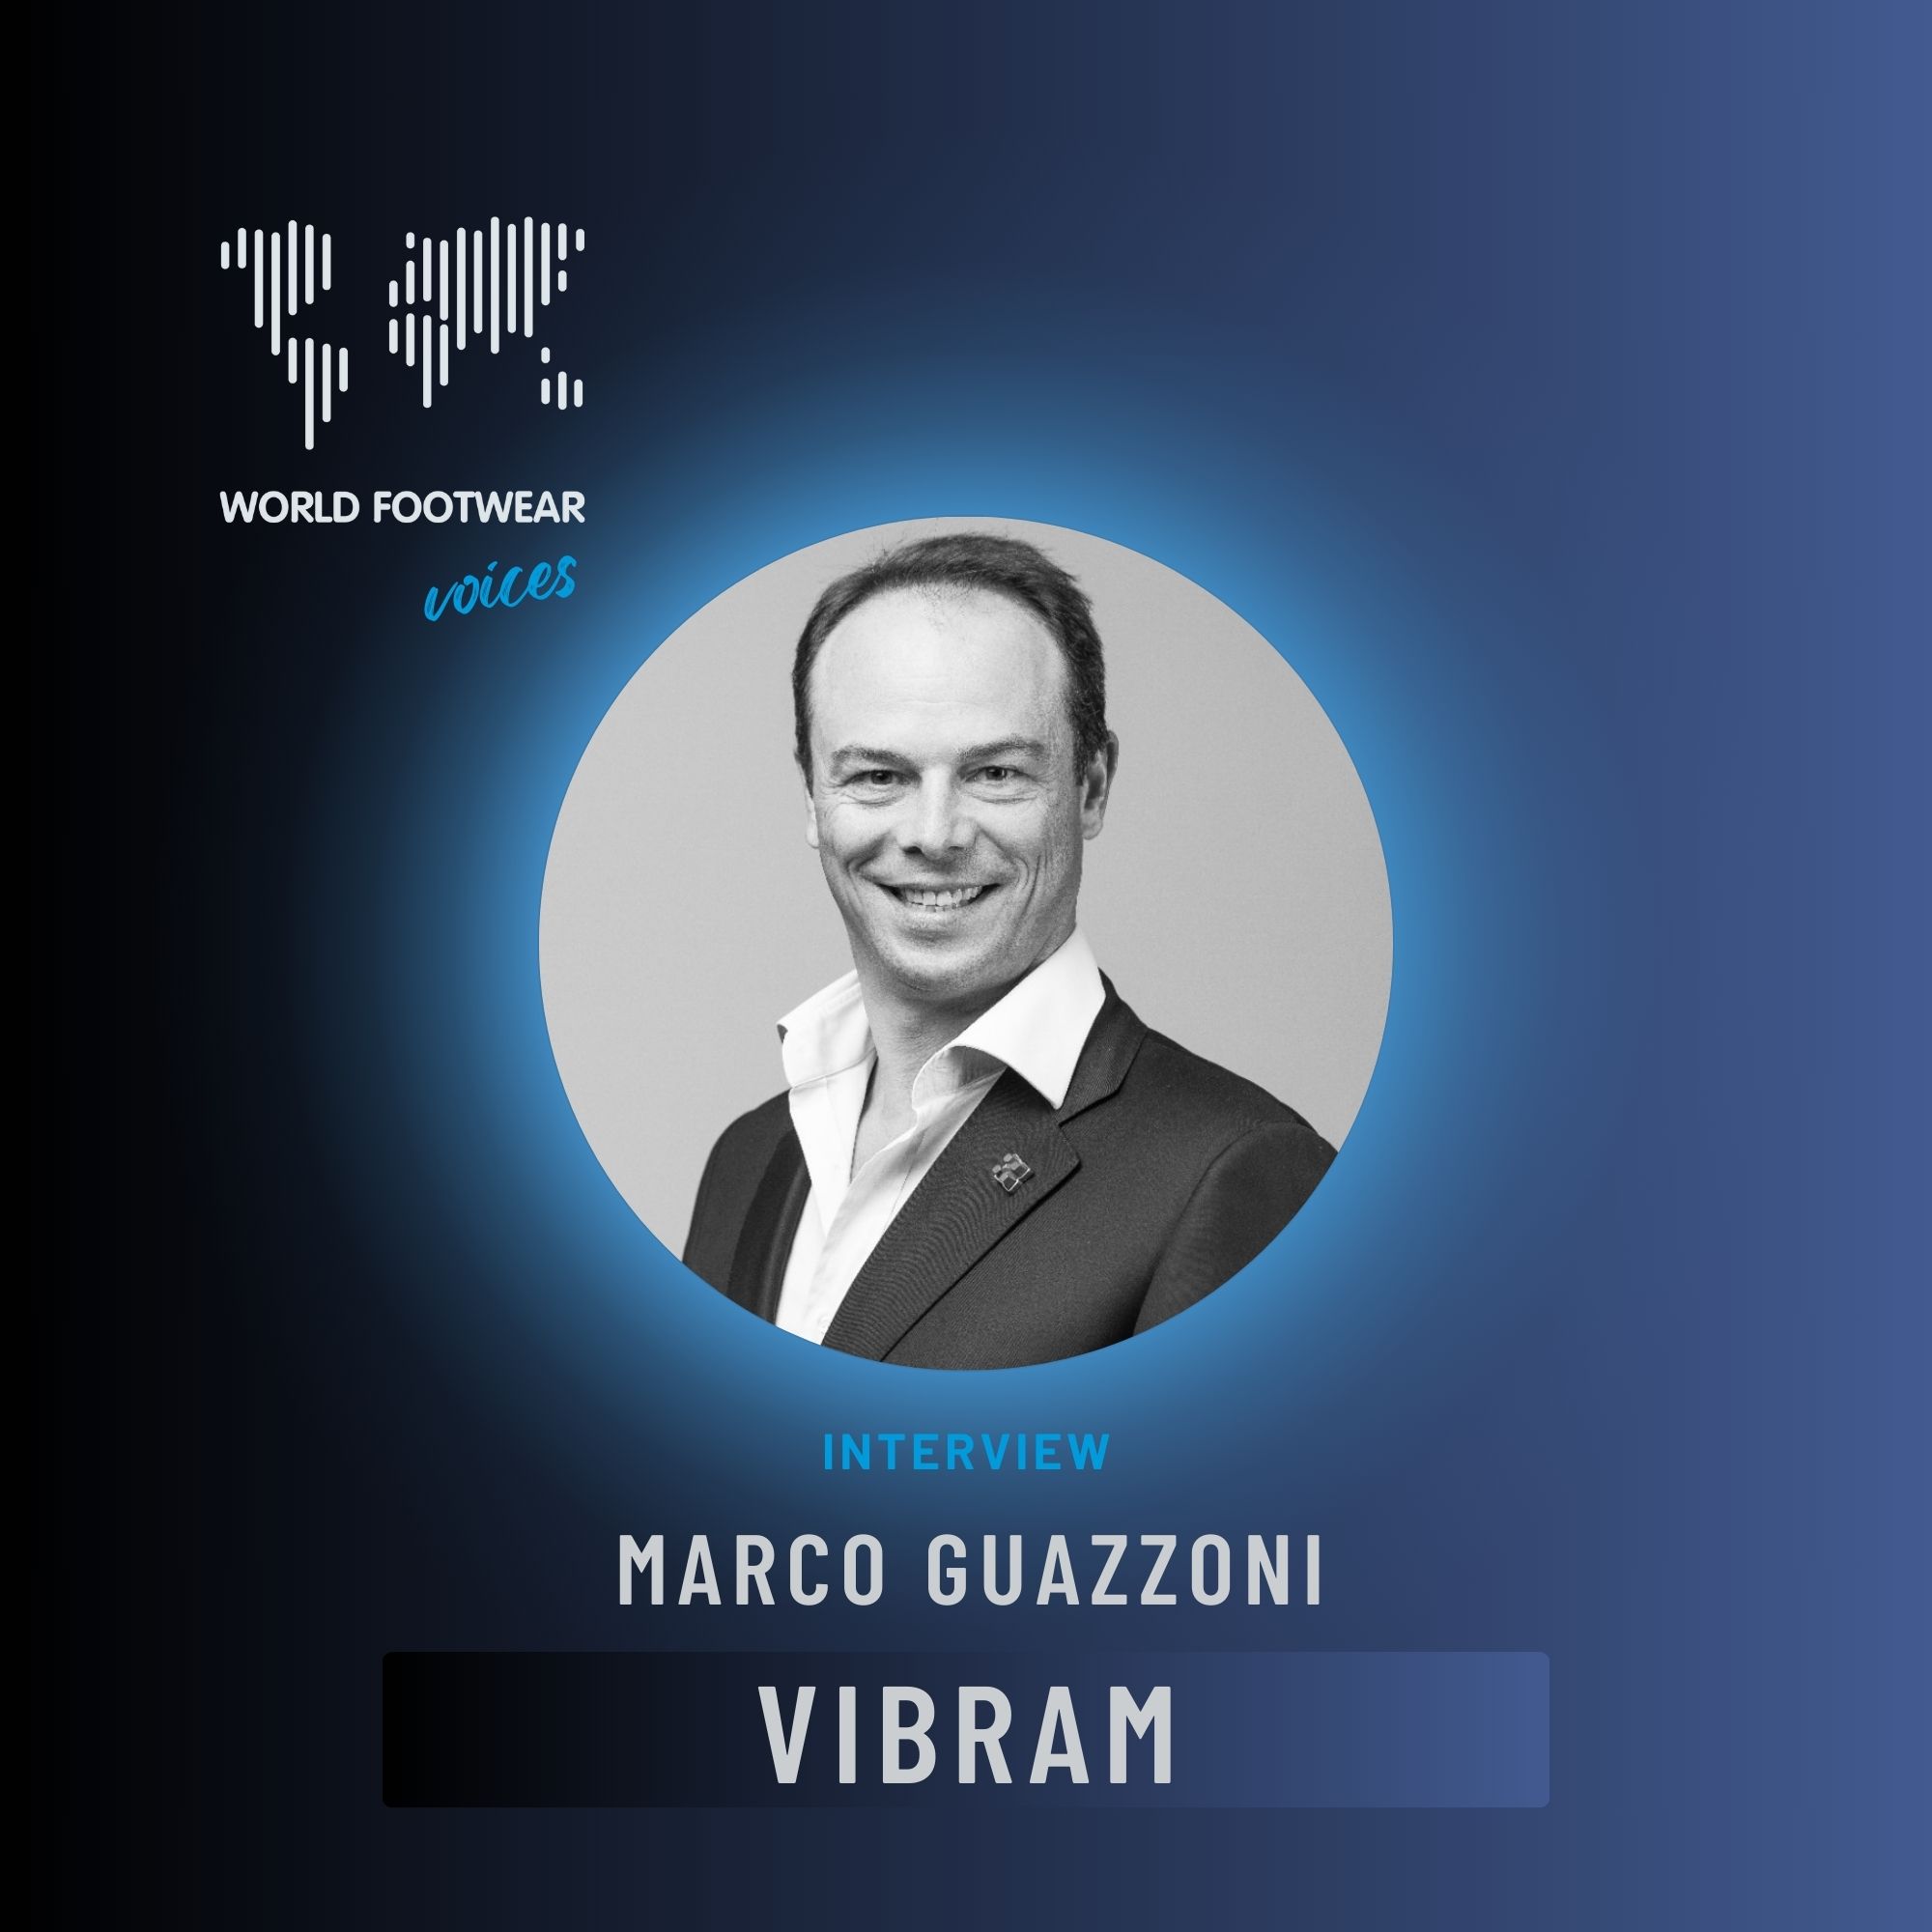 World Footwear Voices: interview with Marco Guazzoni from Vibram